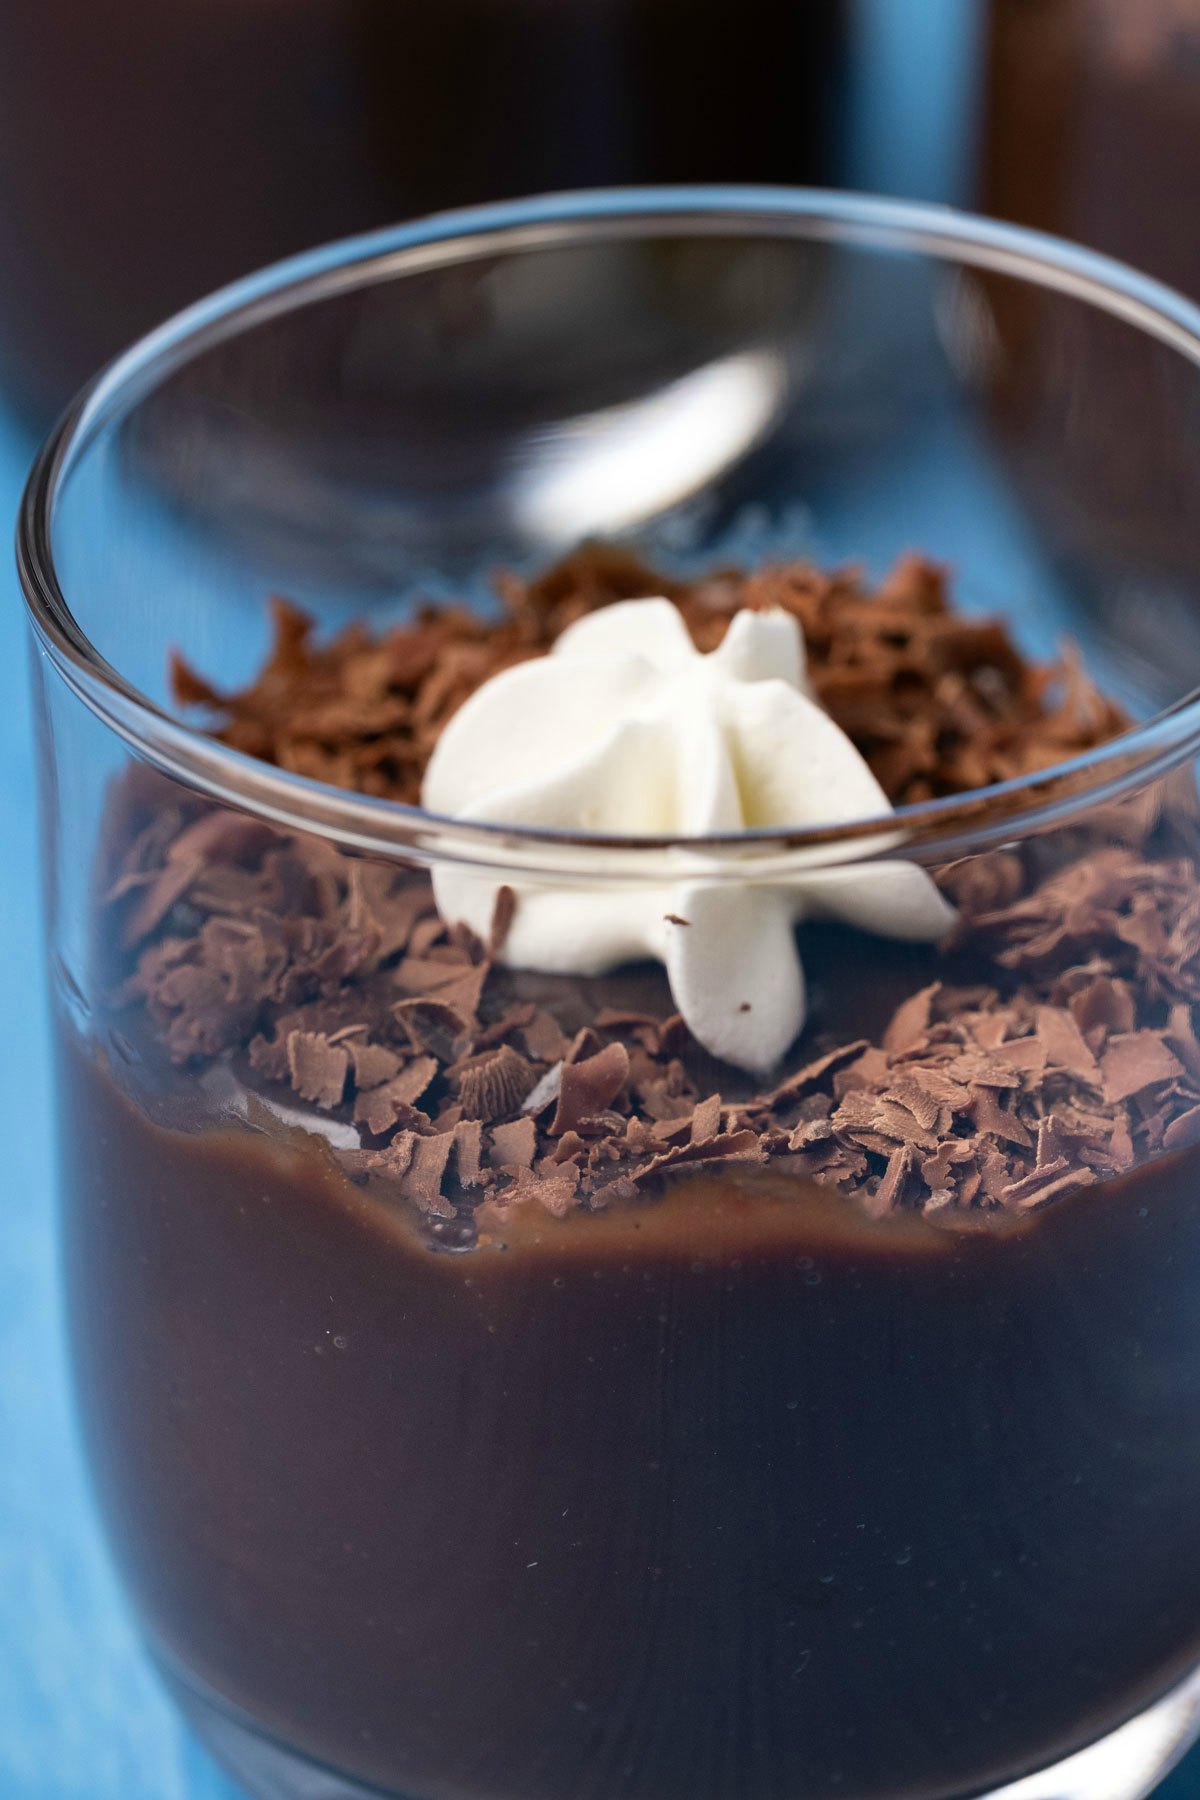 Glass of chocolate pudding with whipped cream and chocolate shavings. 